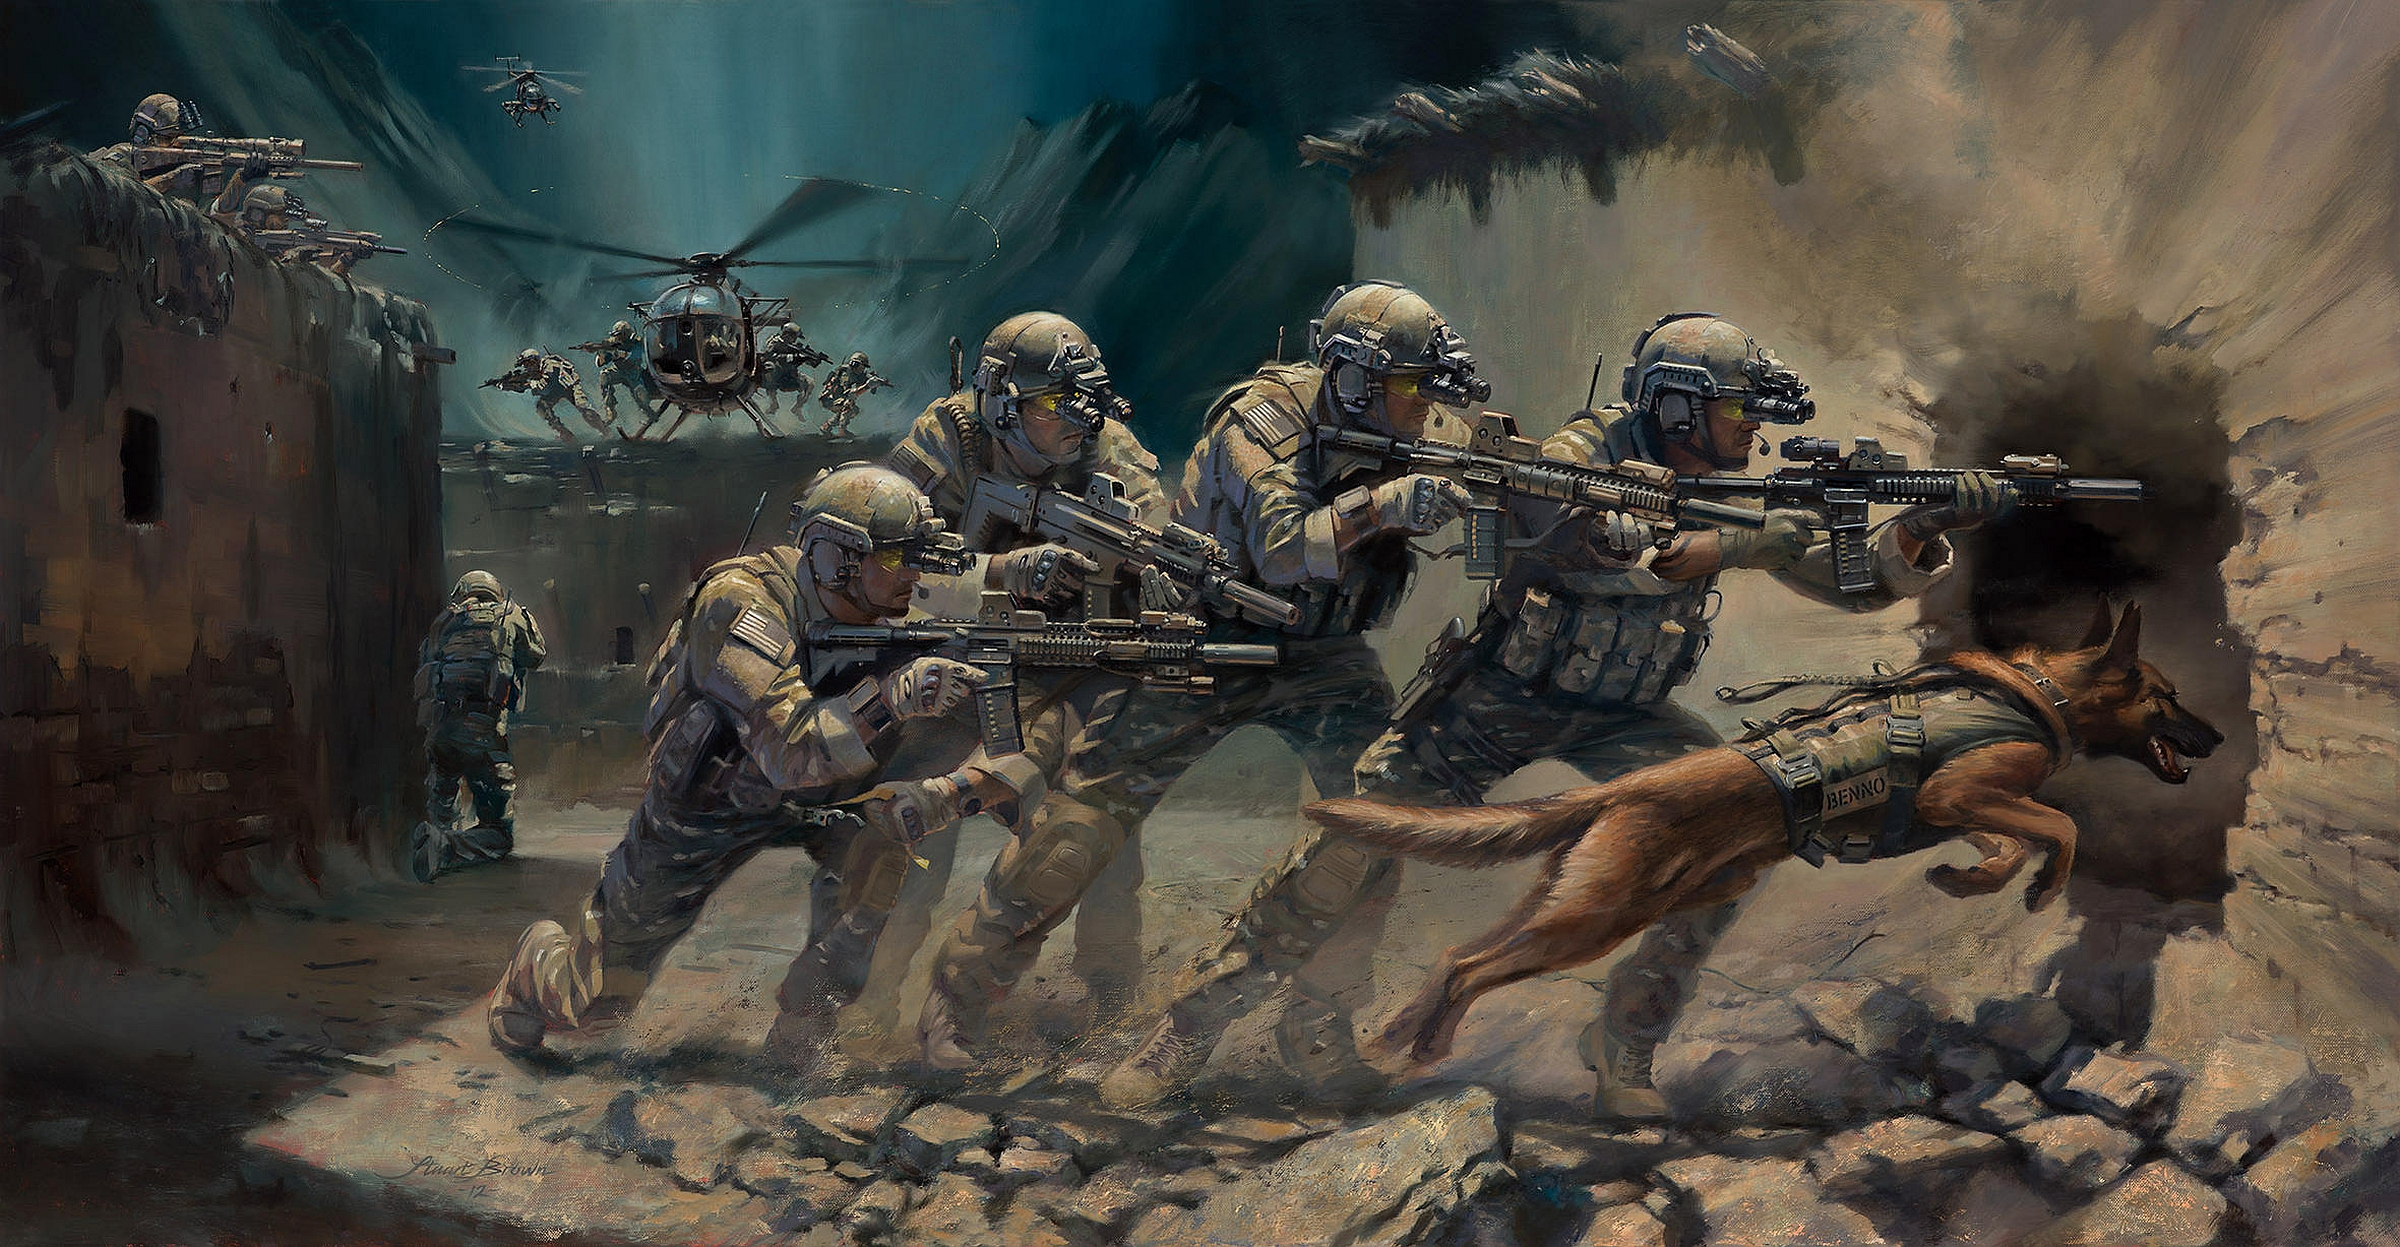 soldier, Artwork, Weapon, Rifles, Assault rifle, Helicopter, Helicopters, Dog, Military Wallpaper